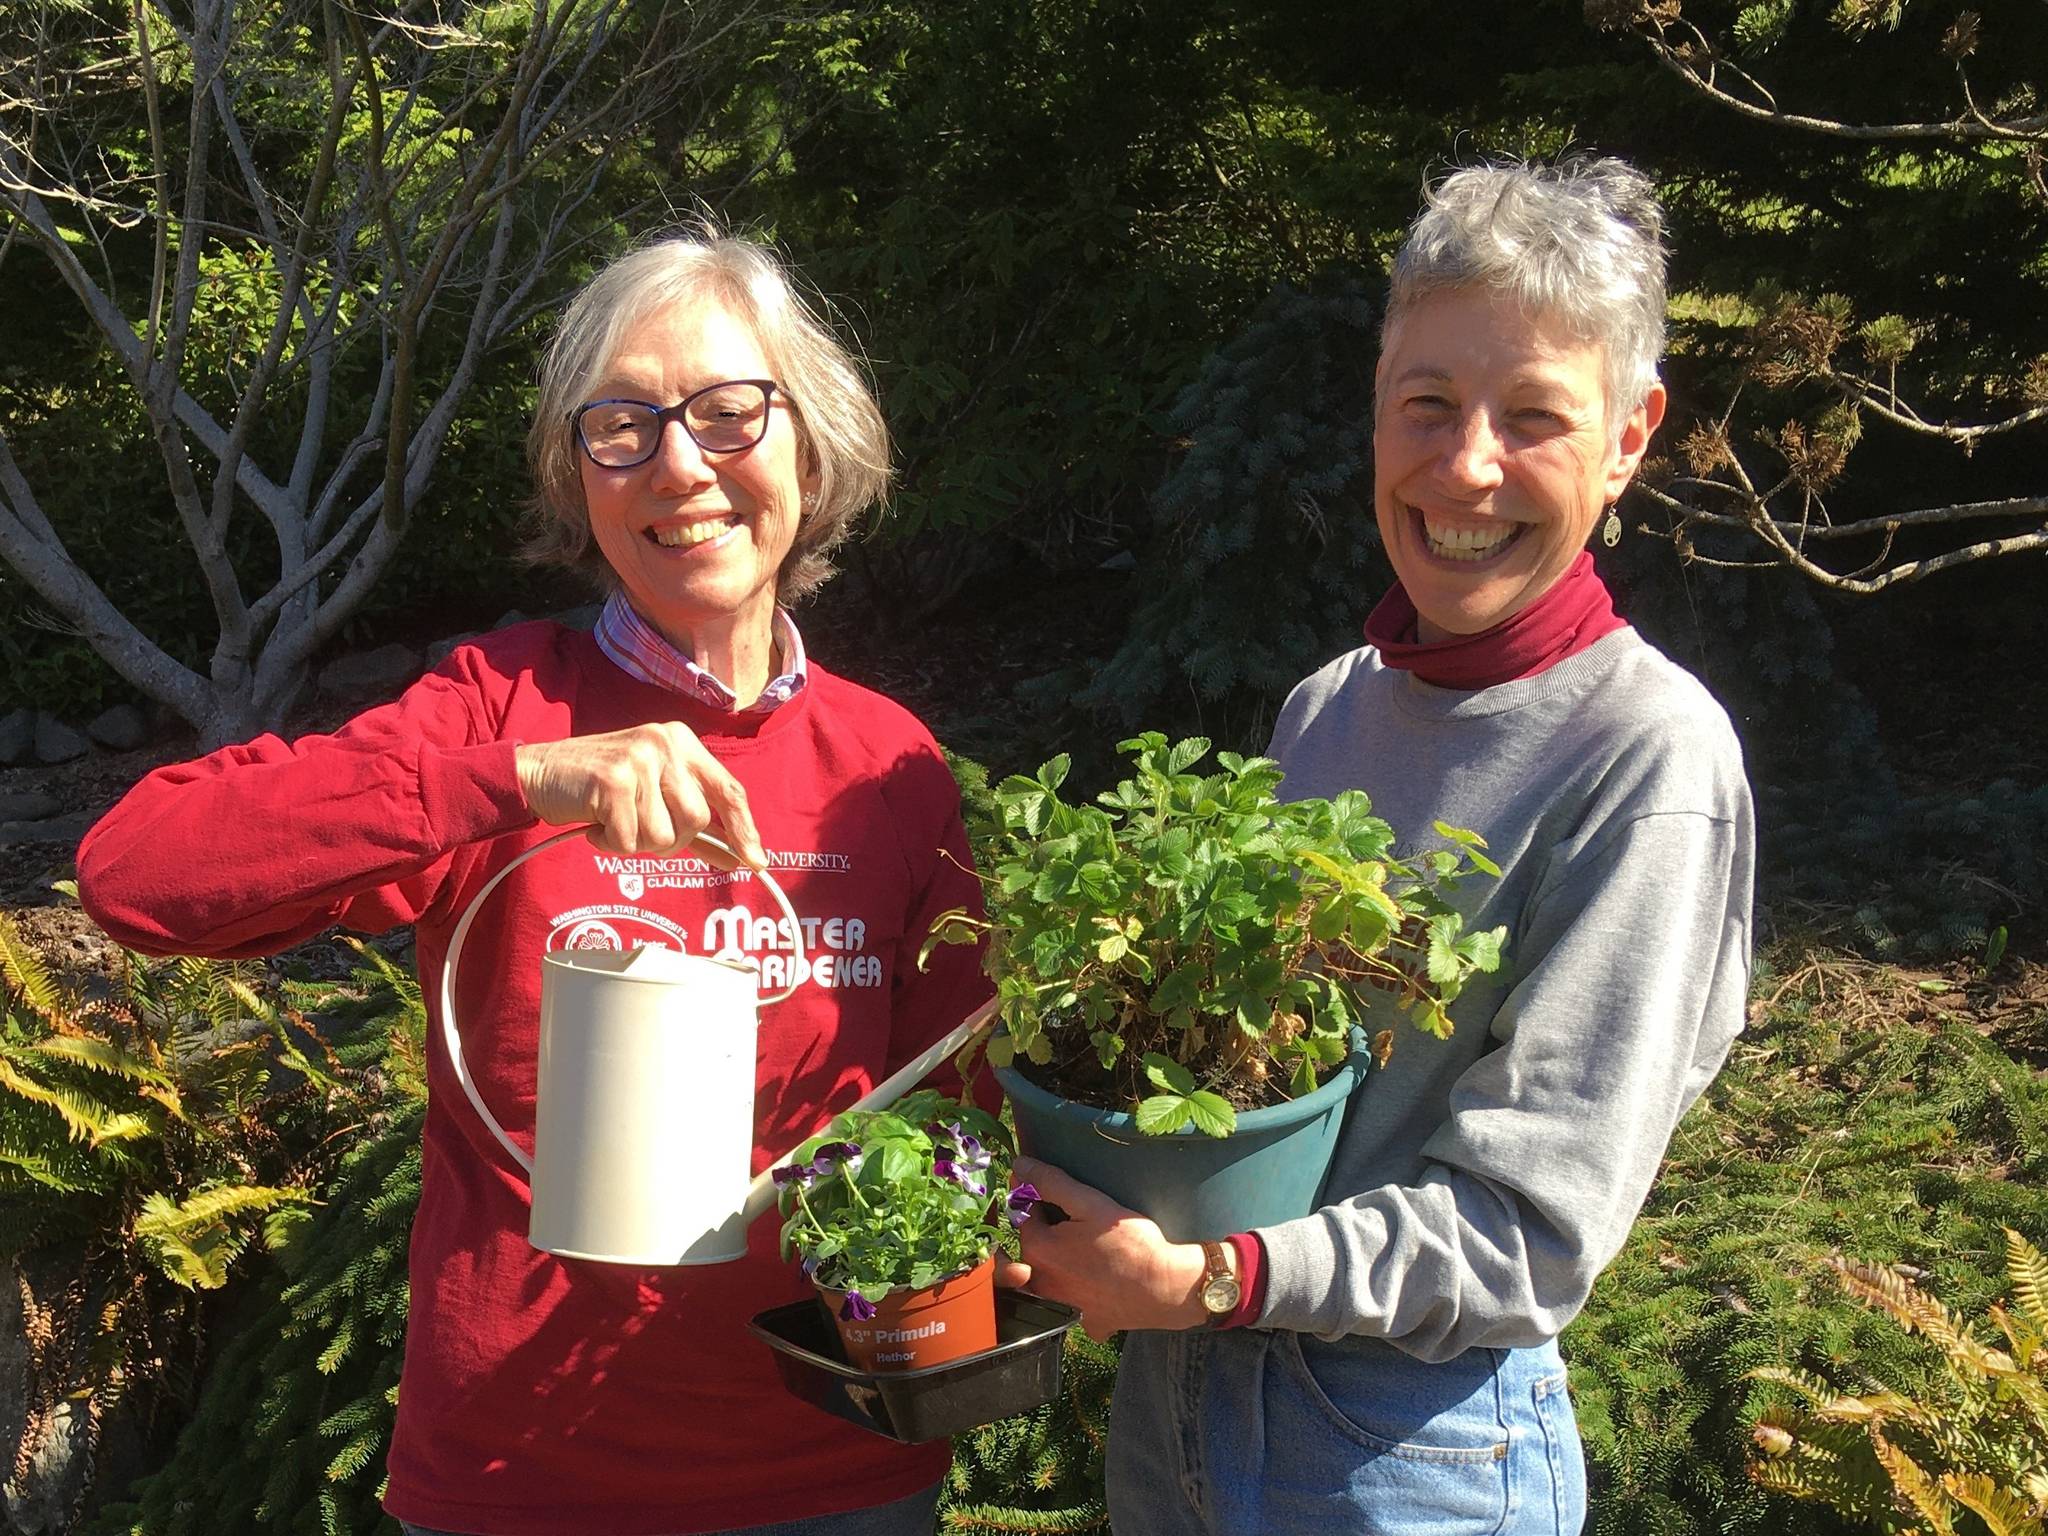 Veteran Master Gardeners Judy English, on the left, and Jeanette Stehr-Green teach gardeners how to grow vegetables and fruits in containers on Thursday, May 27 from noon to 1 p.m. via Zoom. Photo Credit: Judy English